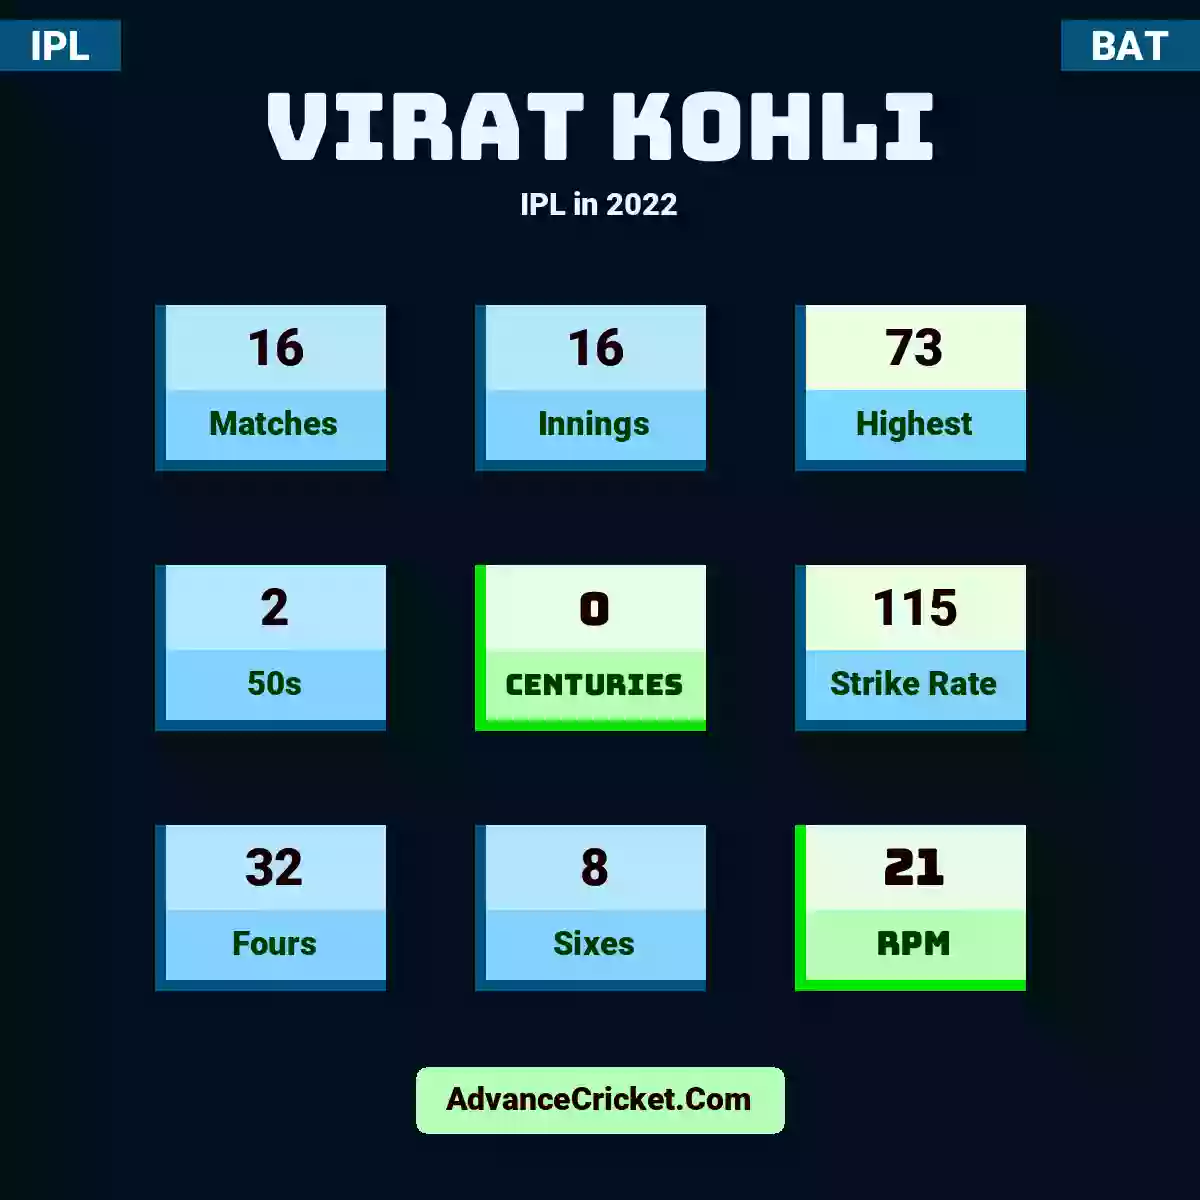 Virat Kohli IPL  in 2022, Virat Kohli played 16 matches, scored 73 runs as highest, 2 half-centuries, and 0 centuries, with a strike rate of 115. V.Kohli hit 32 fours and 8 sixes, with an RPM of 21.